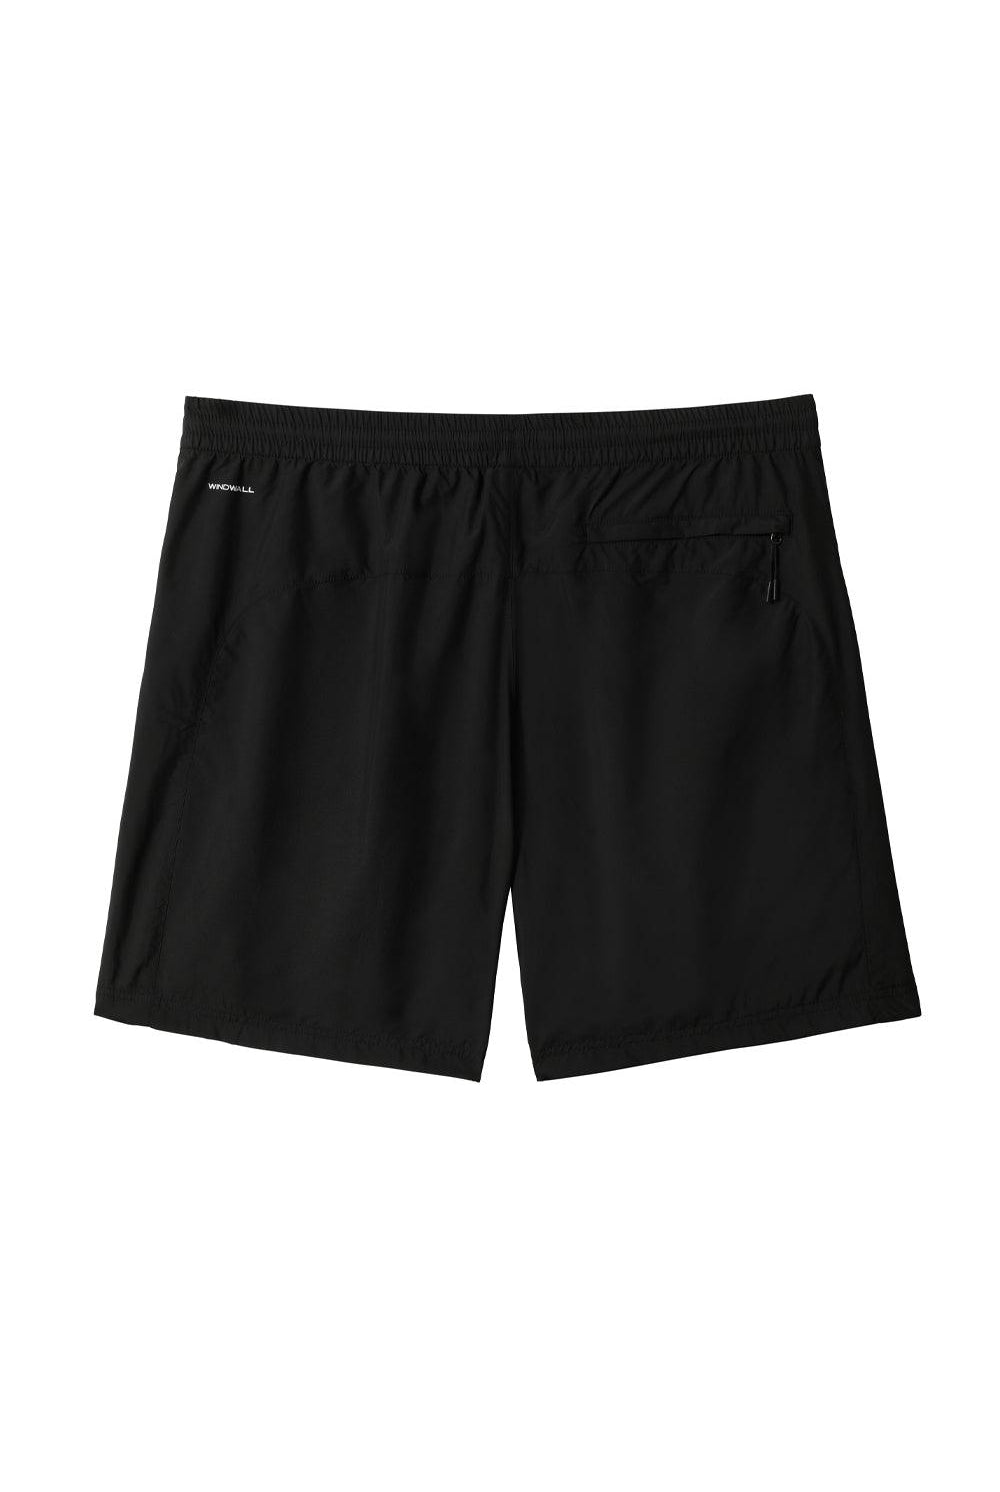 The North Face | Hydrenaline Short 2000 Black 1 | Milagron